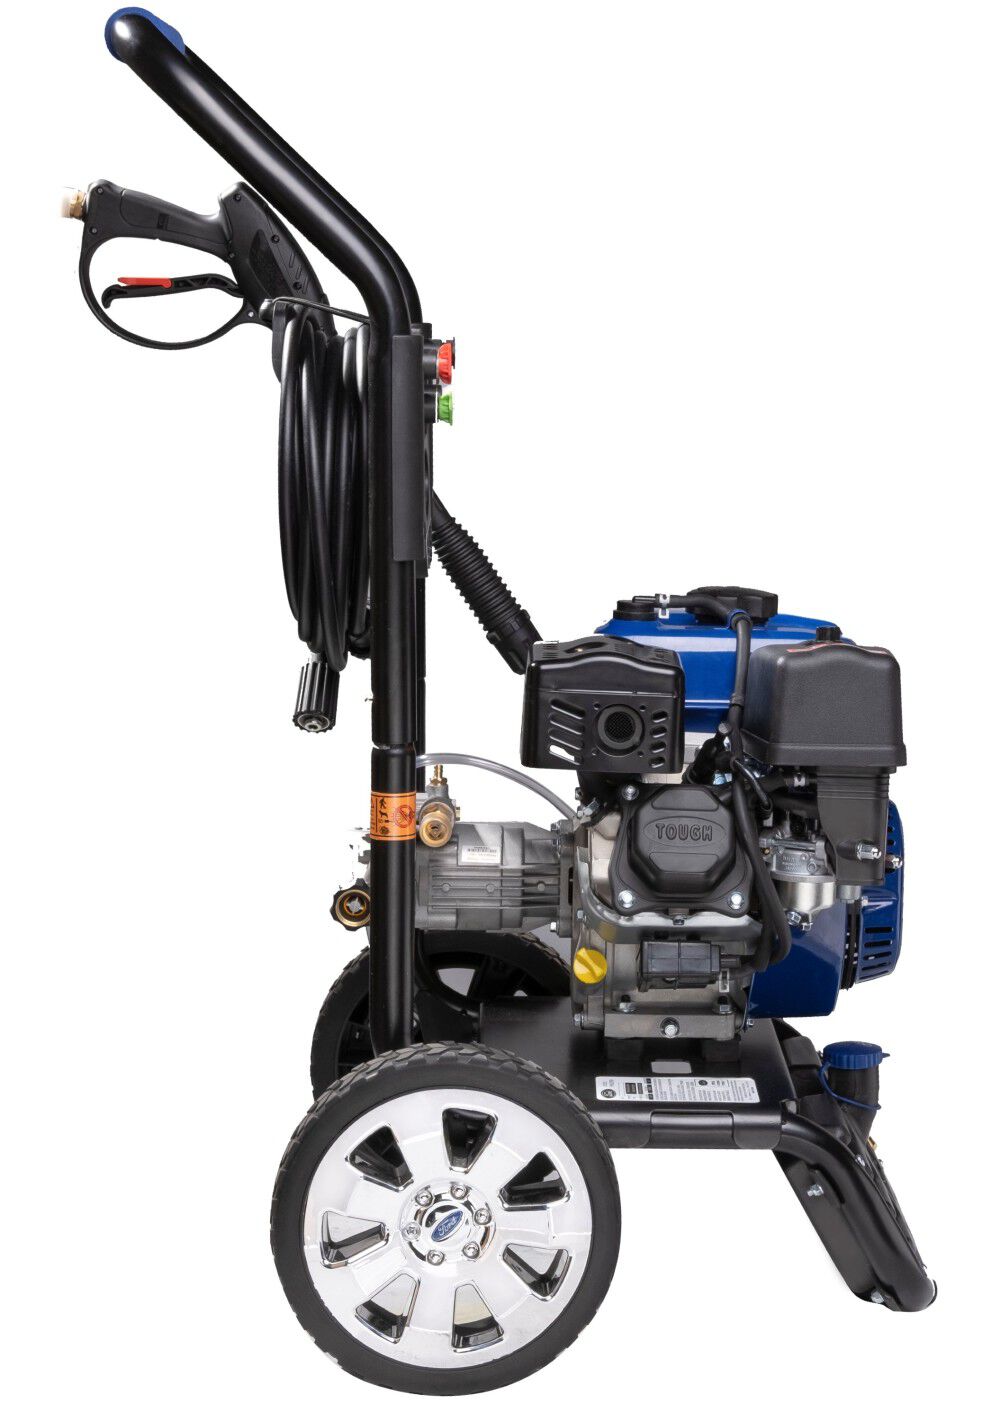 2900 PSI 2.5 GPM Pressure Washer with 212cc Engine FPWG2900H